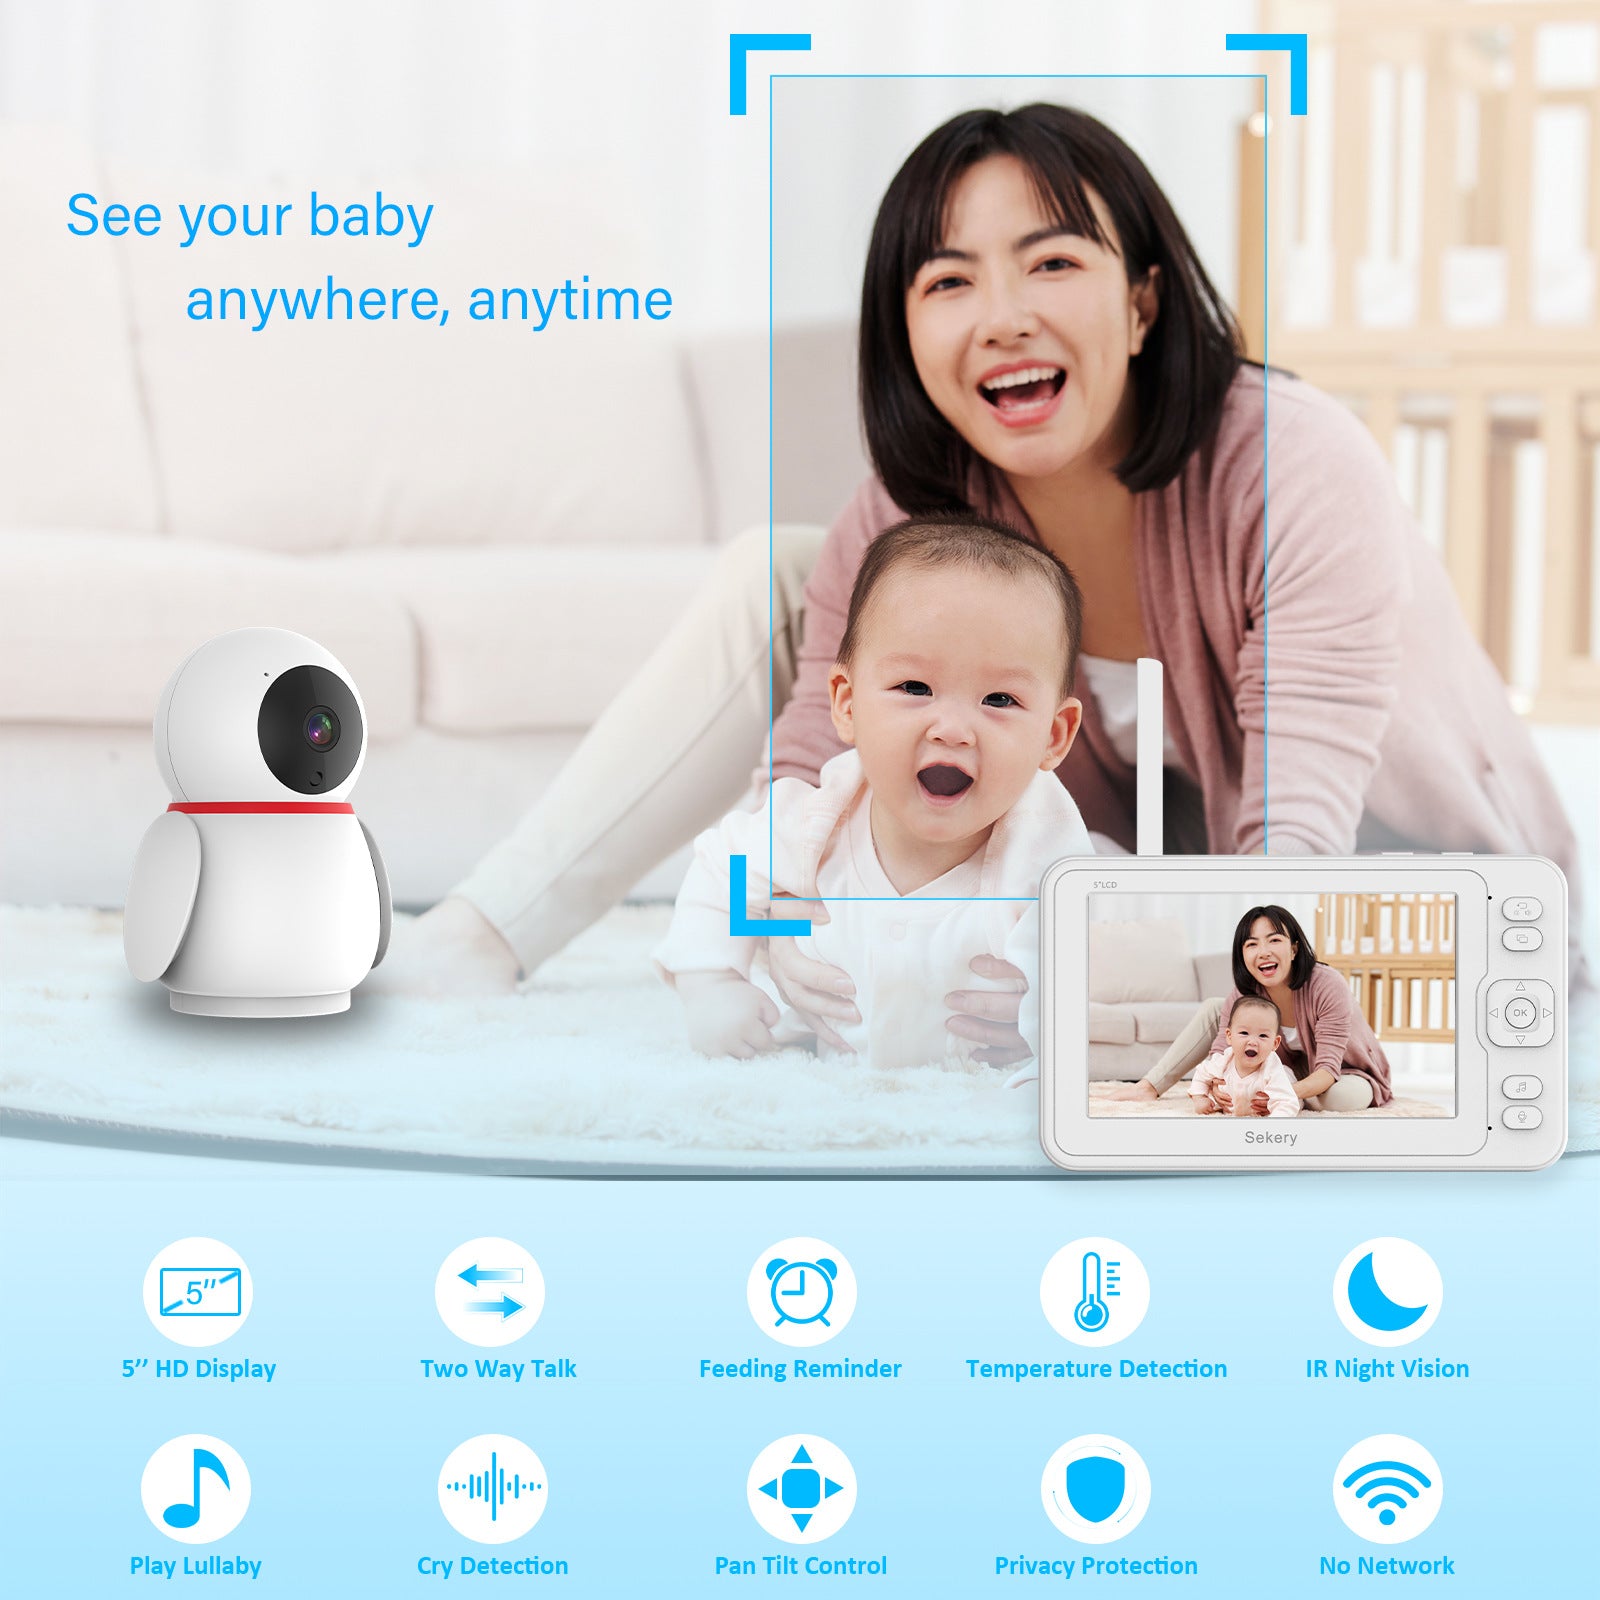 baby monitor NZ with Mum and baby